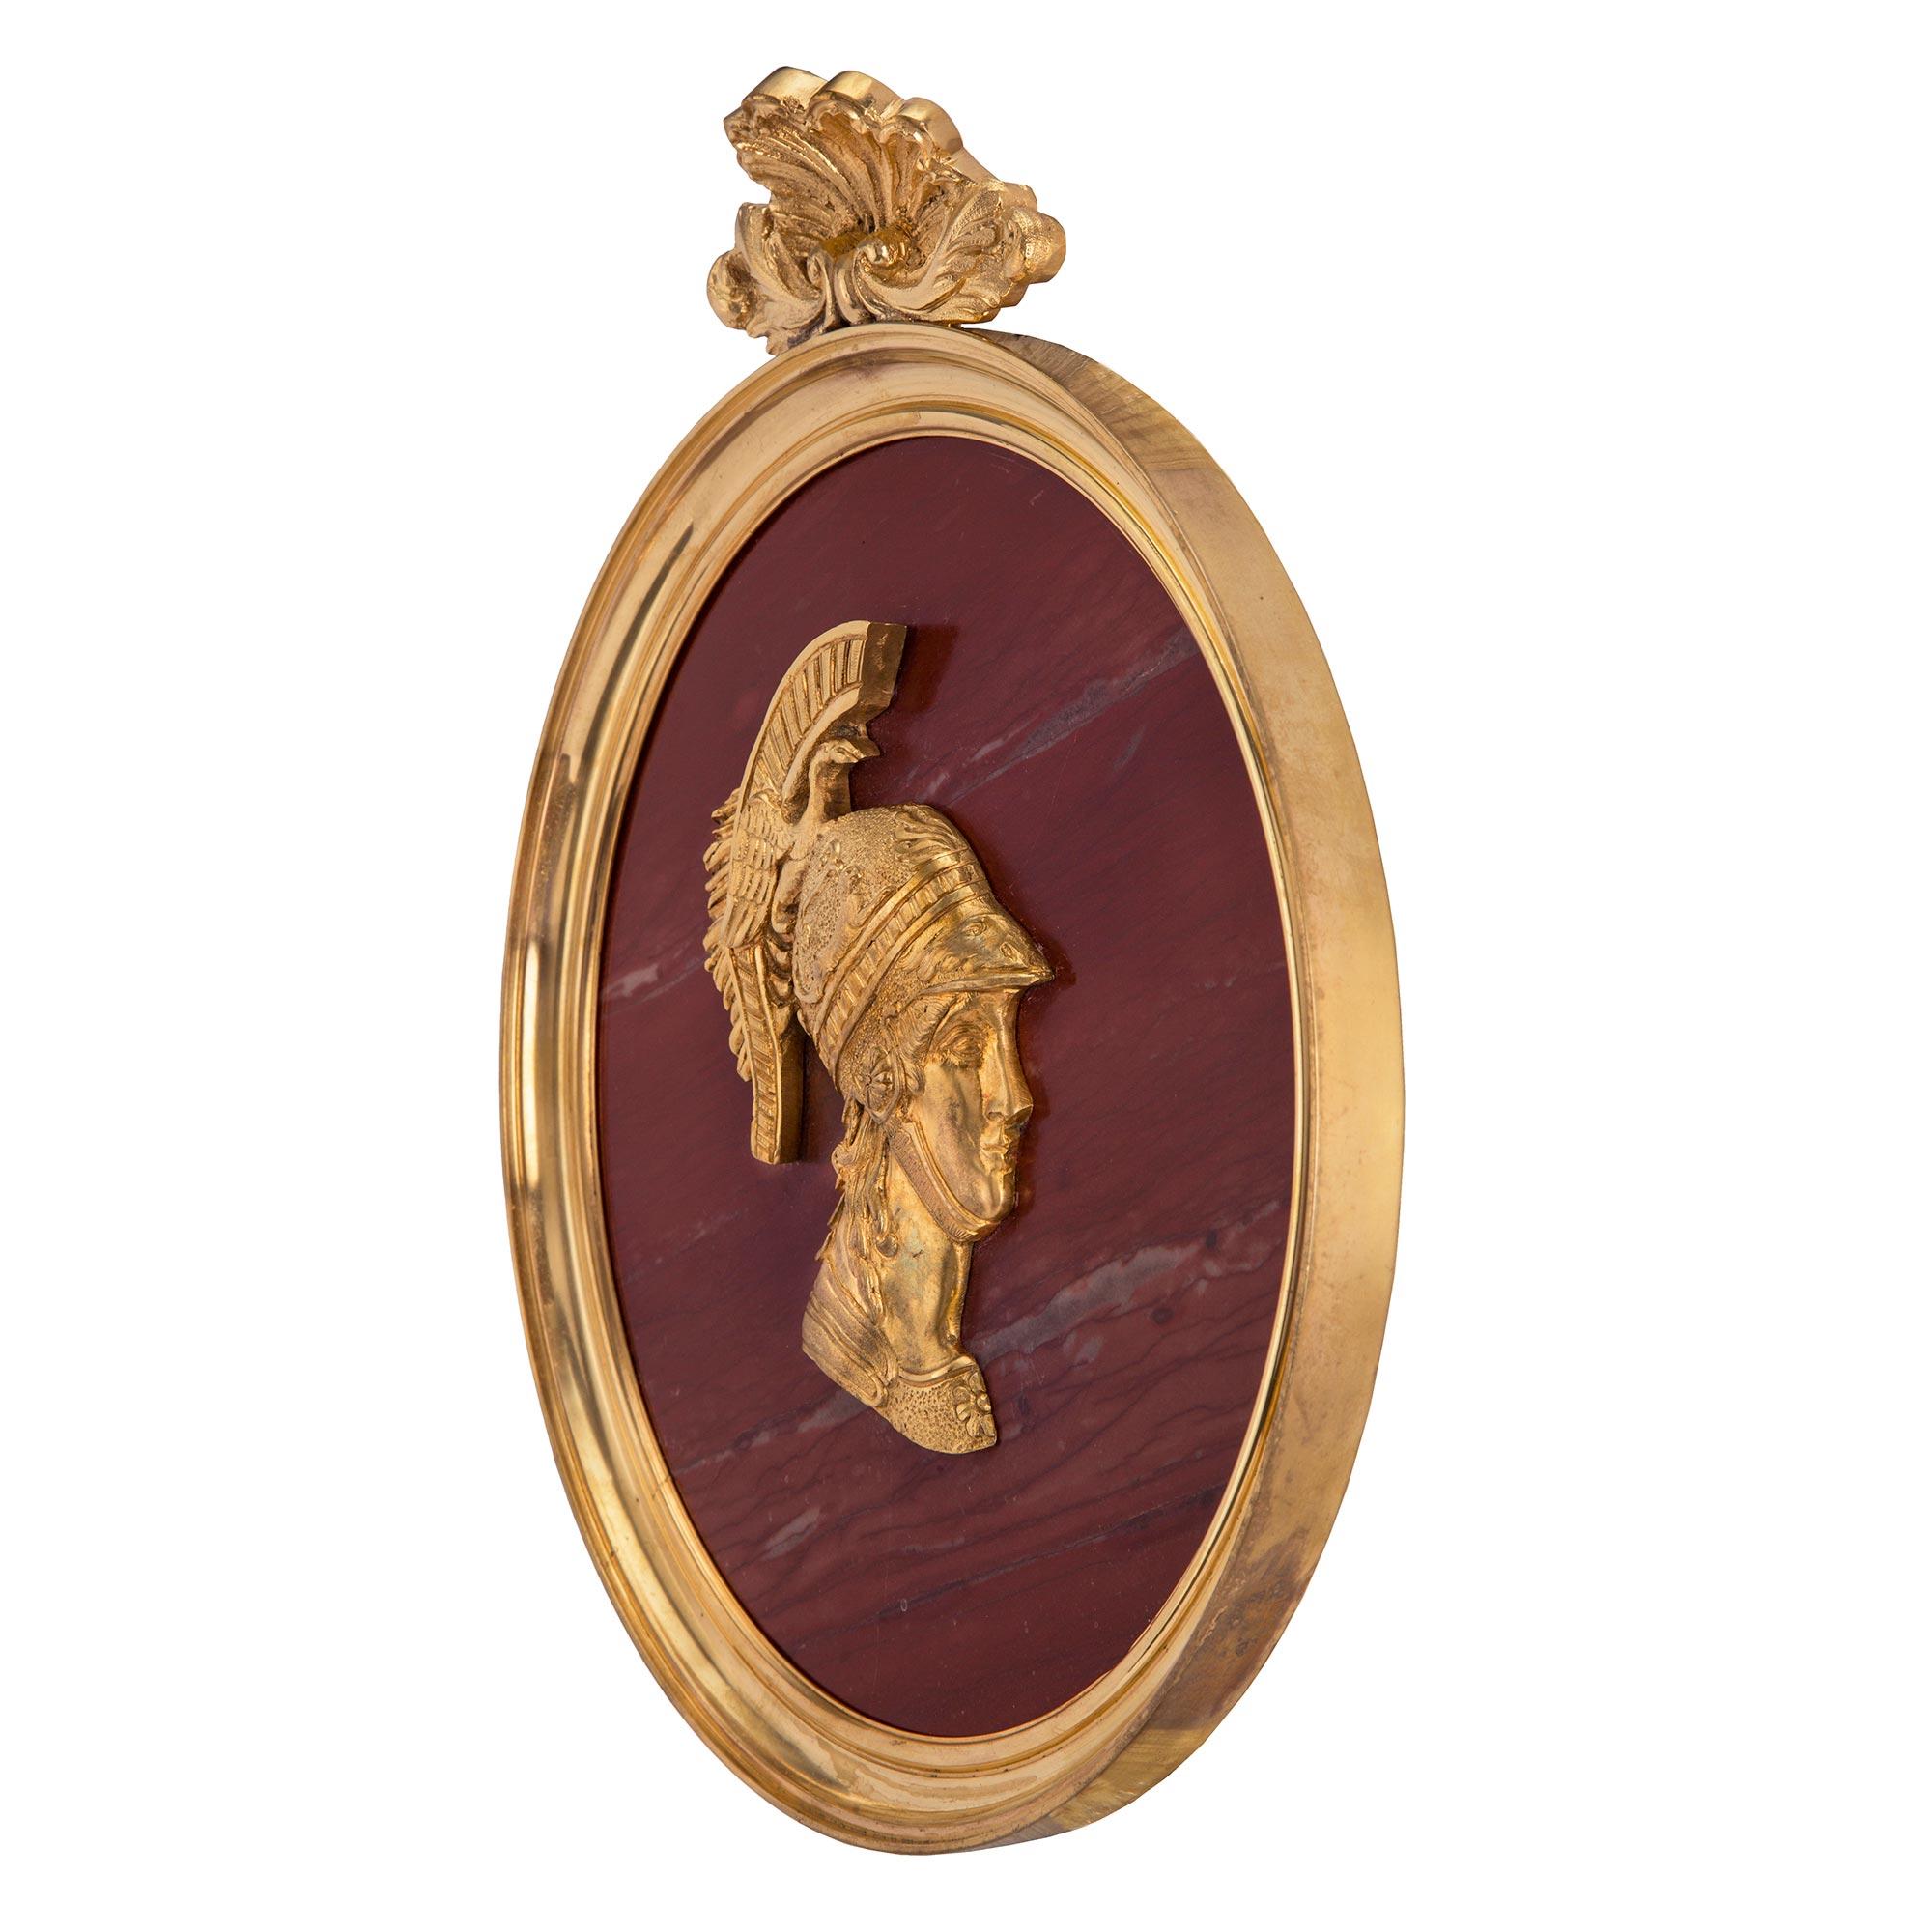 A most elegant and high quality true pair of Italian 19th century Neo-Classical st. Rosso Antico marble and ormolu wall plaques. Each striking plaque is framed within a circular mottled ormolu border with a fine seashell reserve at the top flanked